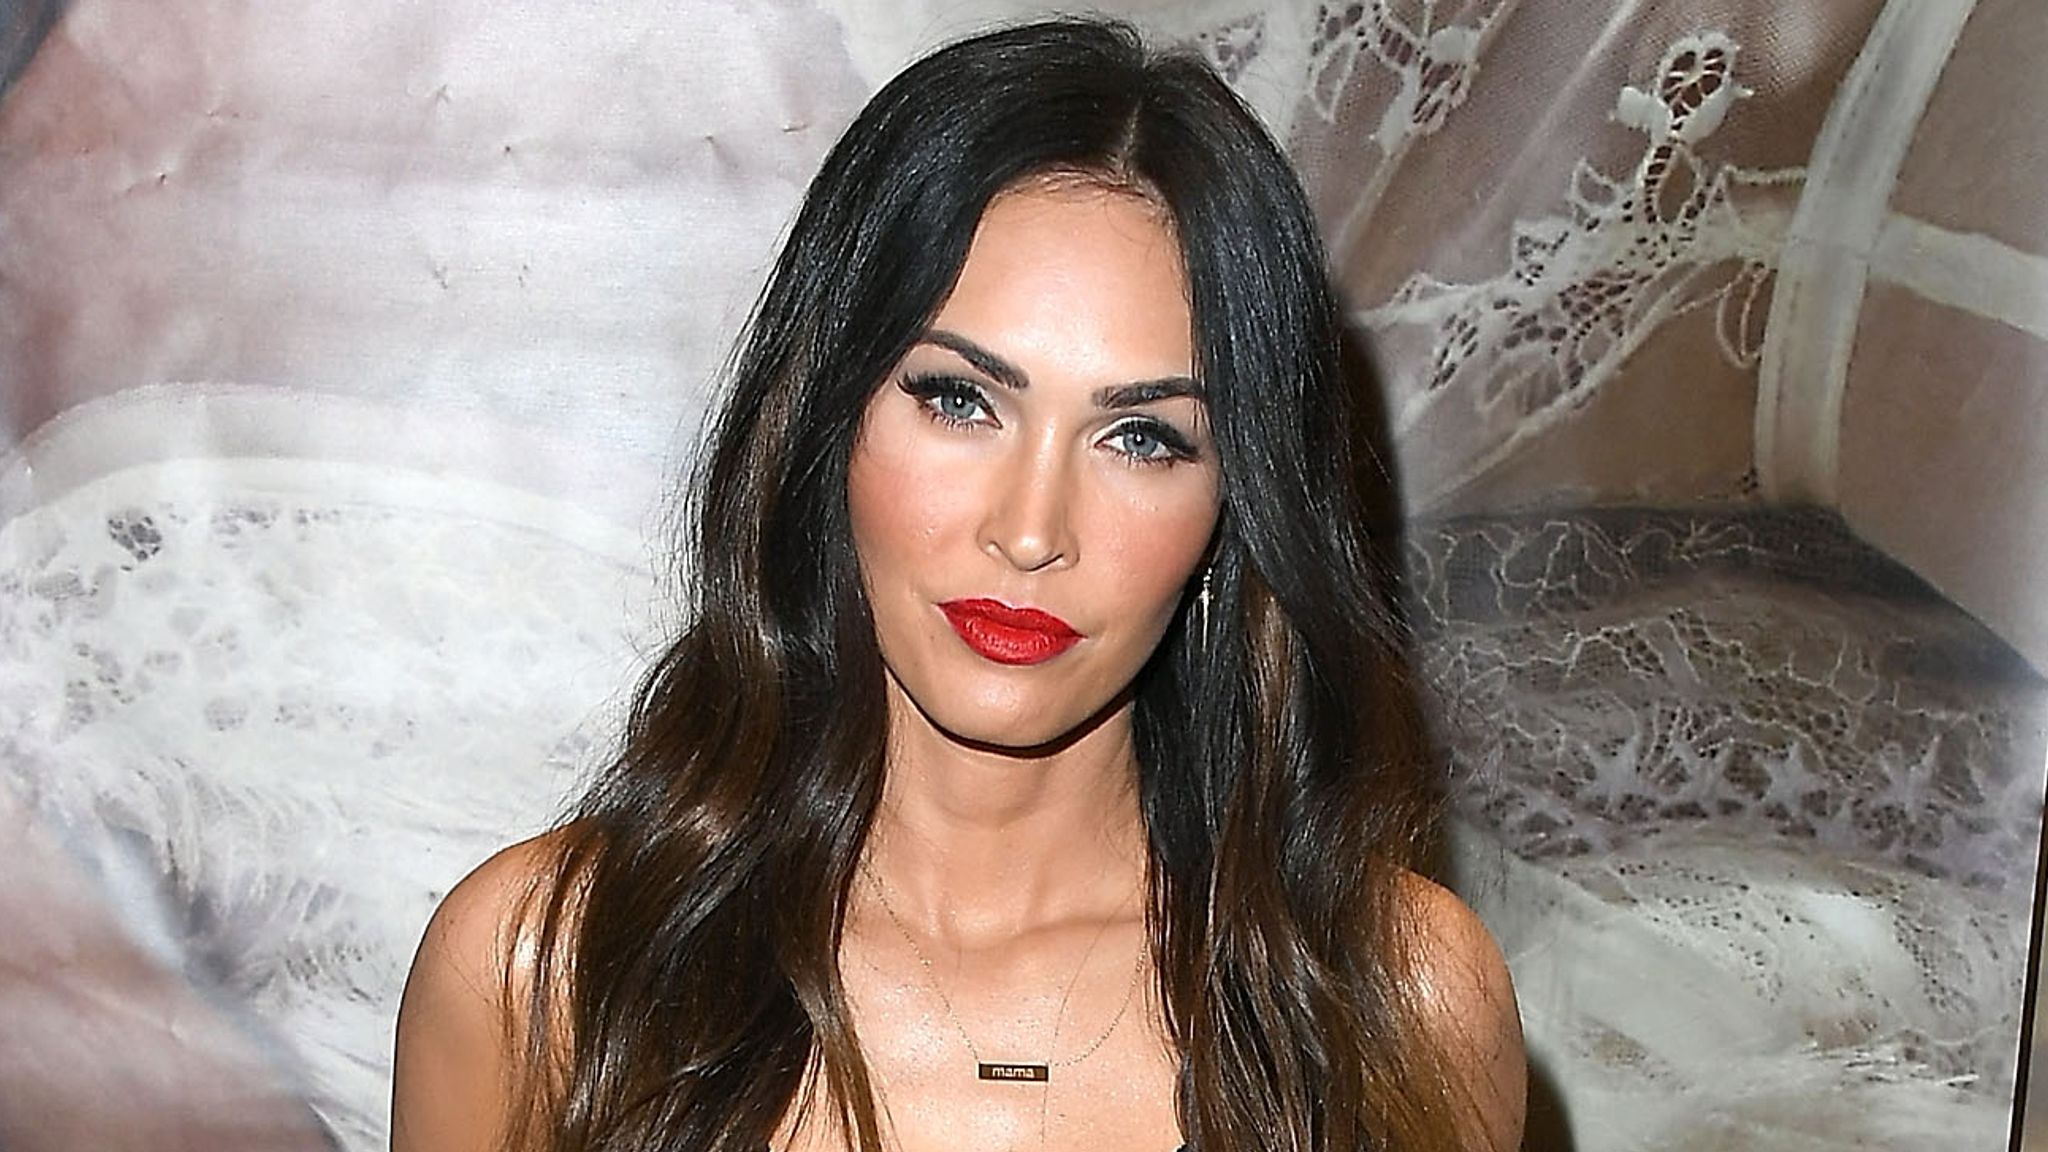 In the interview Megan Fox says she was 'in 10th grade' when she ...